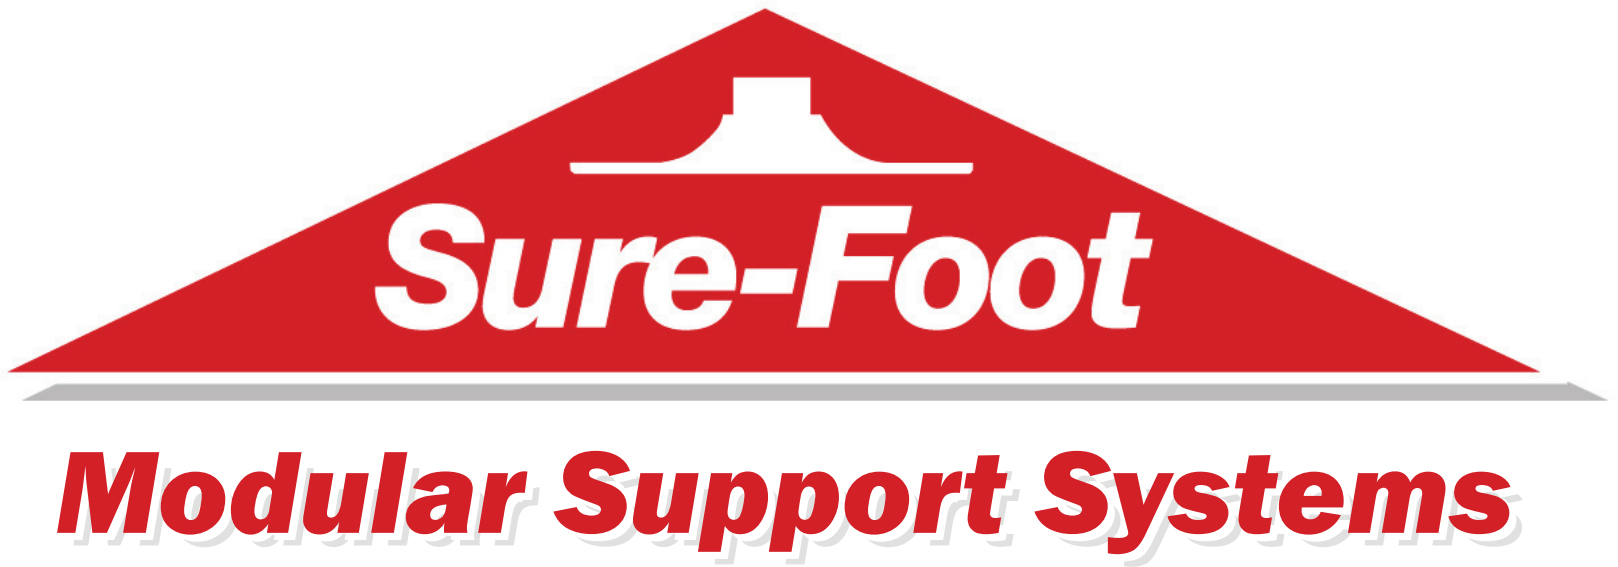 Sure-Foot Modular Support Systems